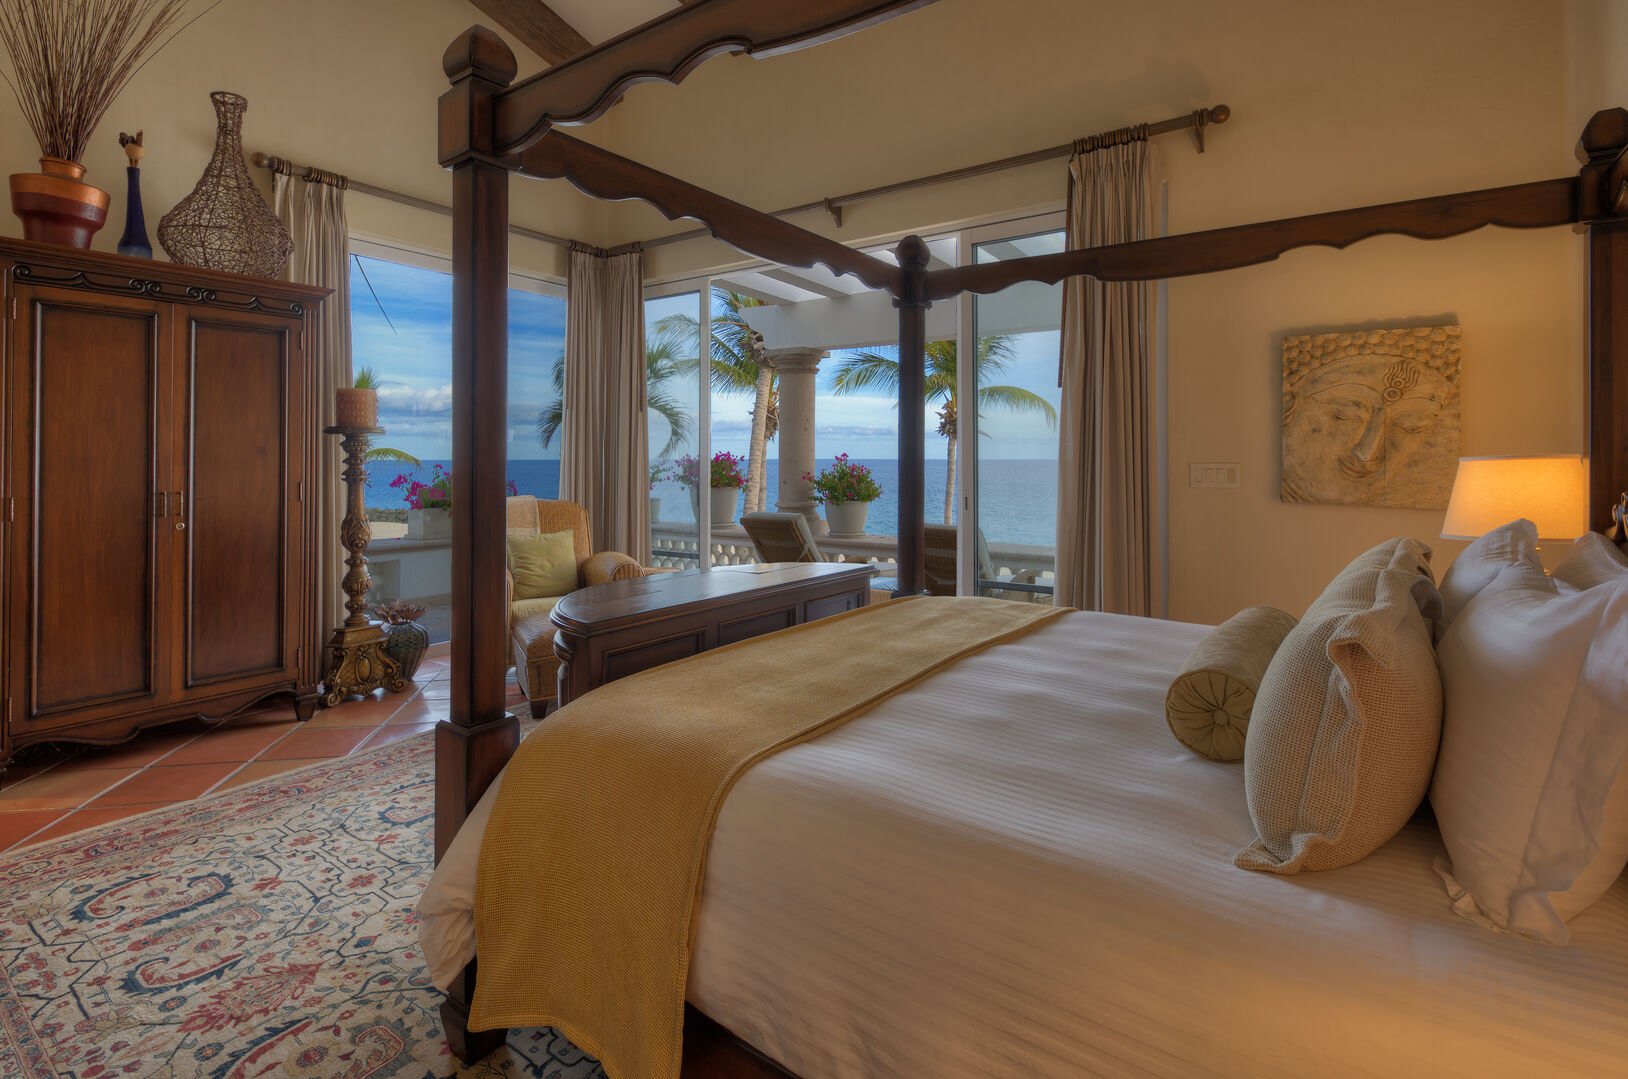 Bedroom with a private ocean view balcony, a large bed, and an armoire